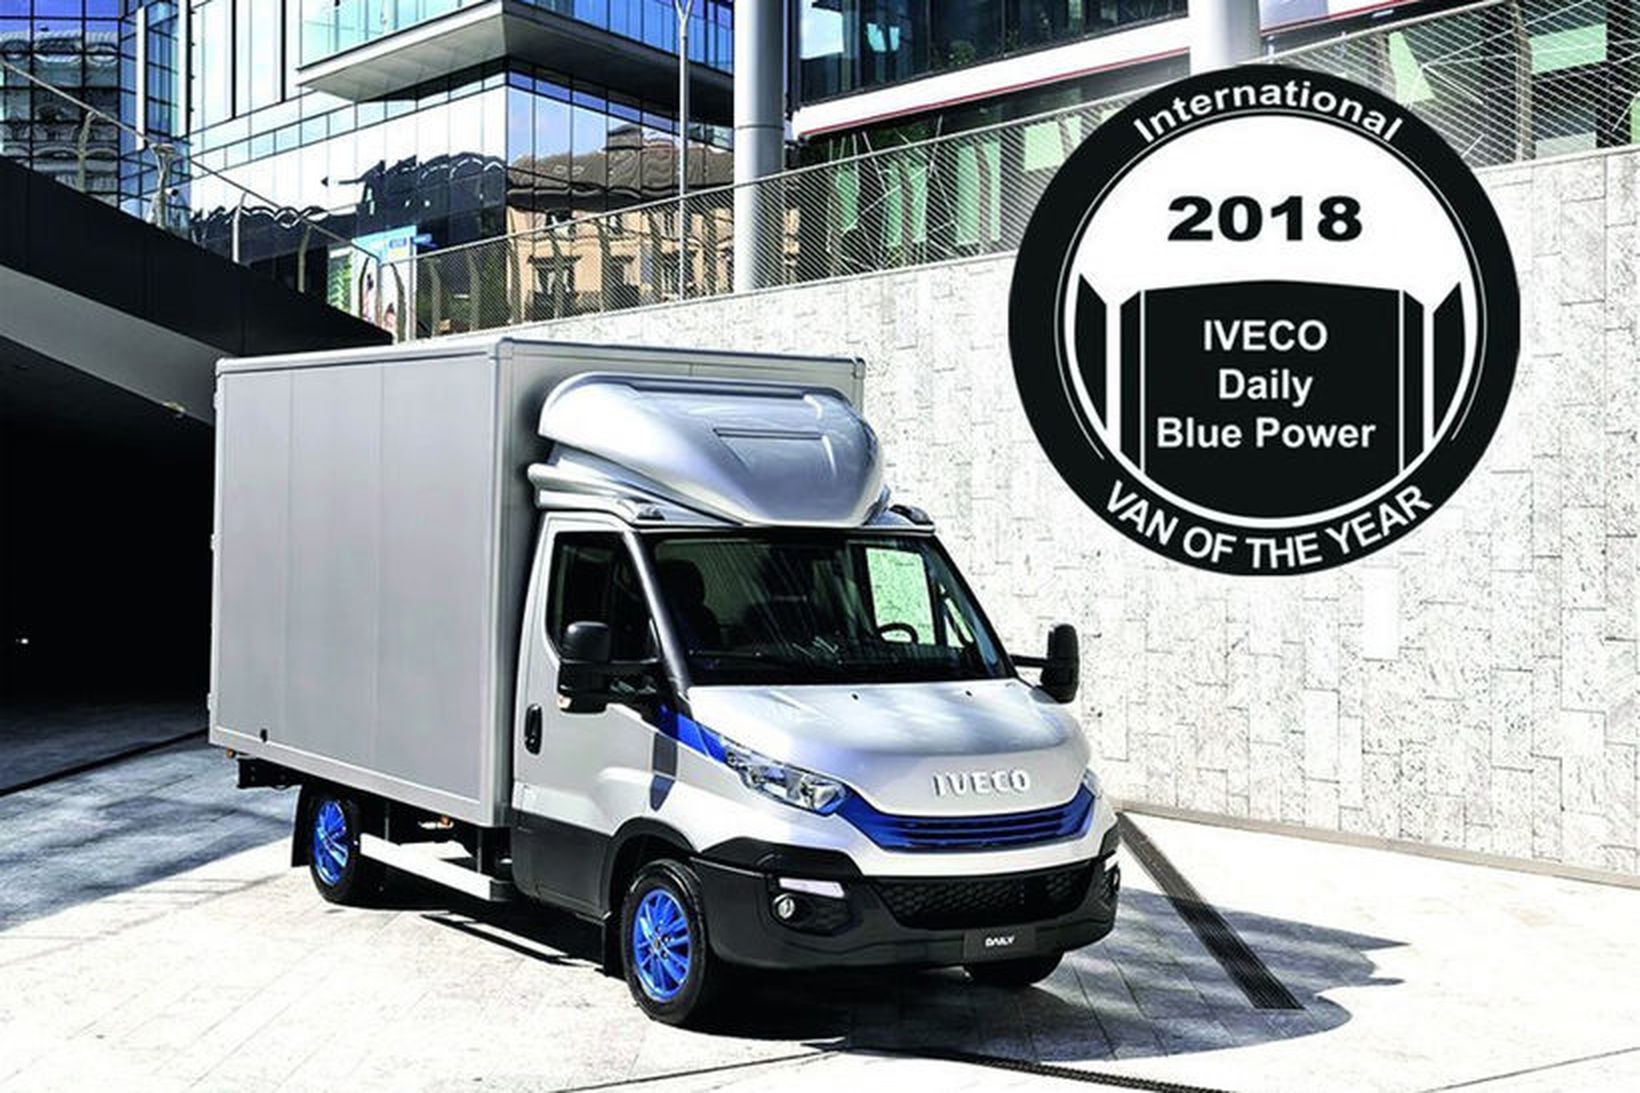 Iveco Daily Blue Power.